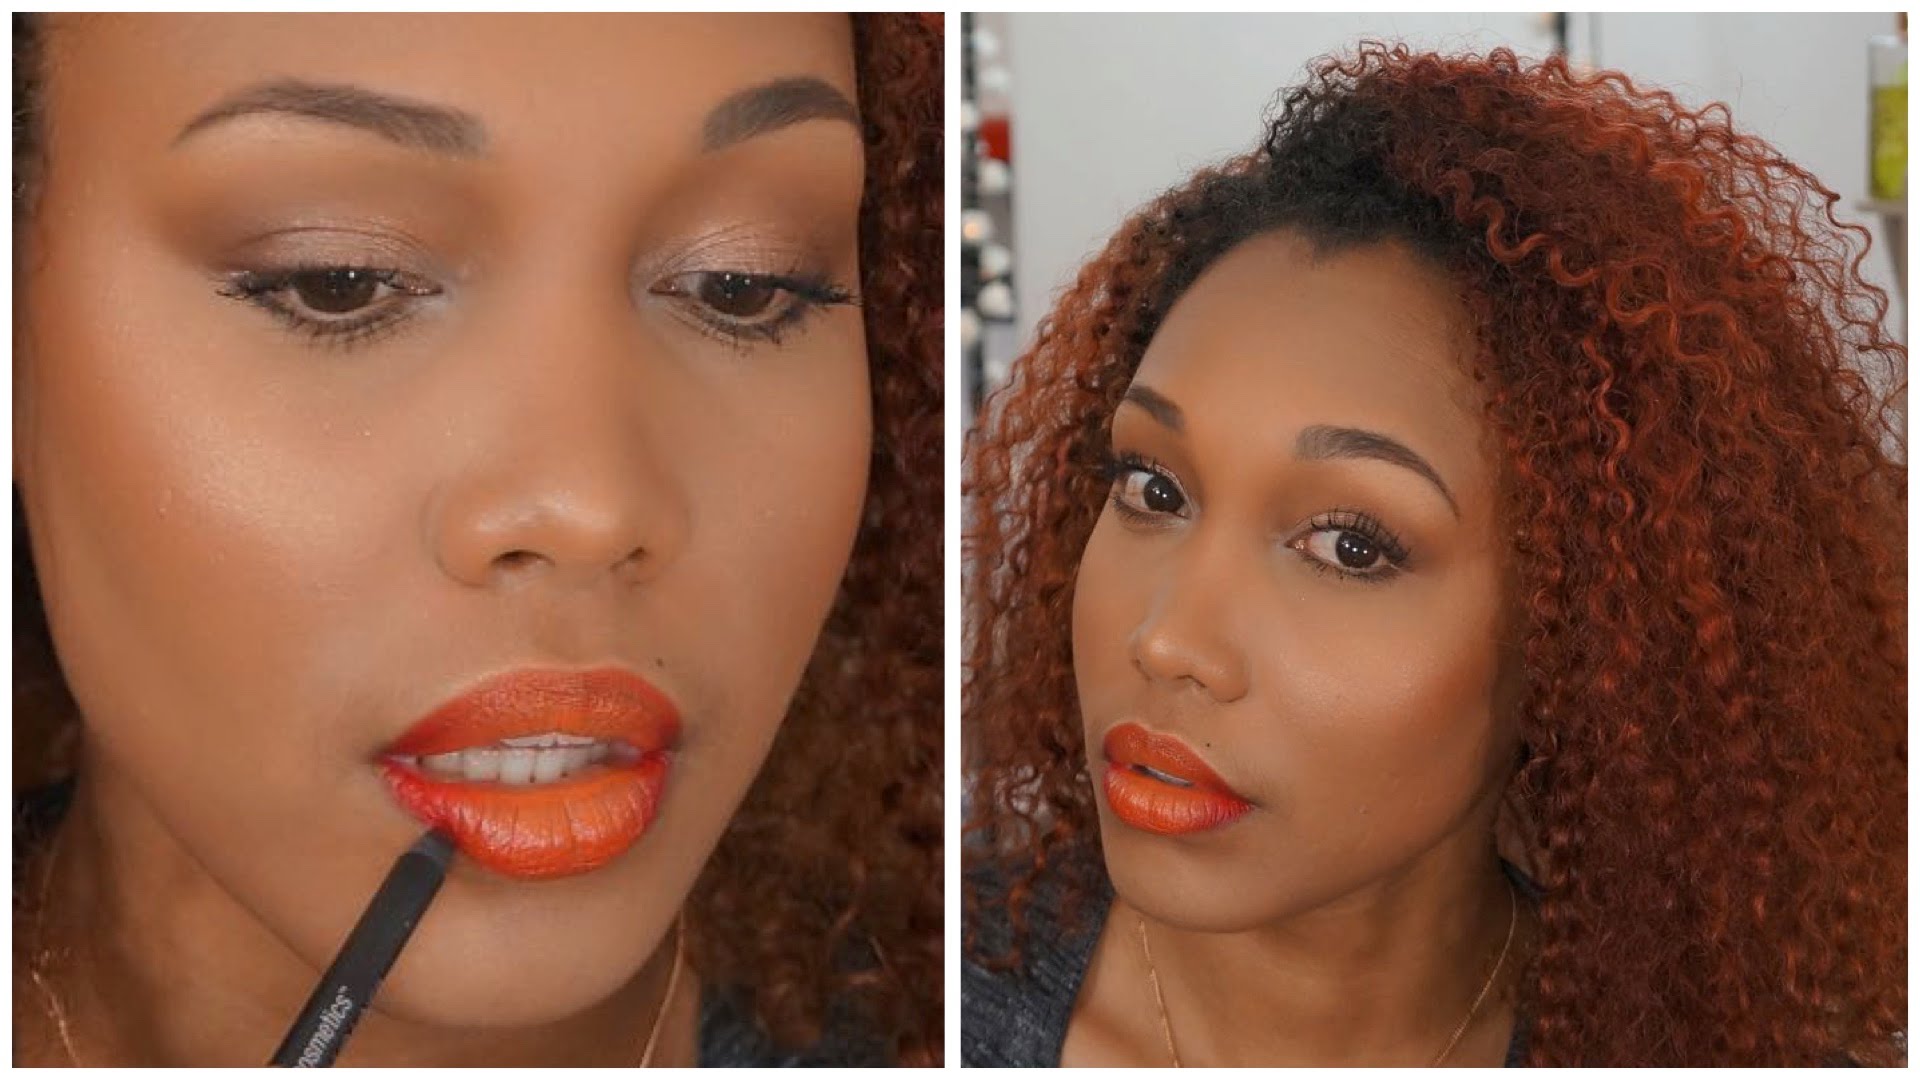 Glowy makeup & red/orange ombre lips - YouTube